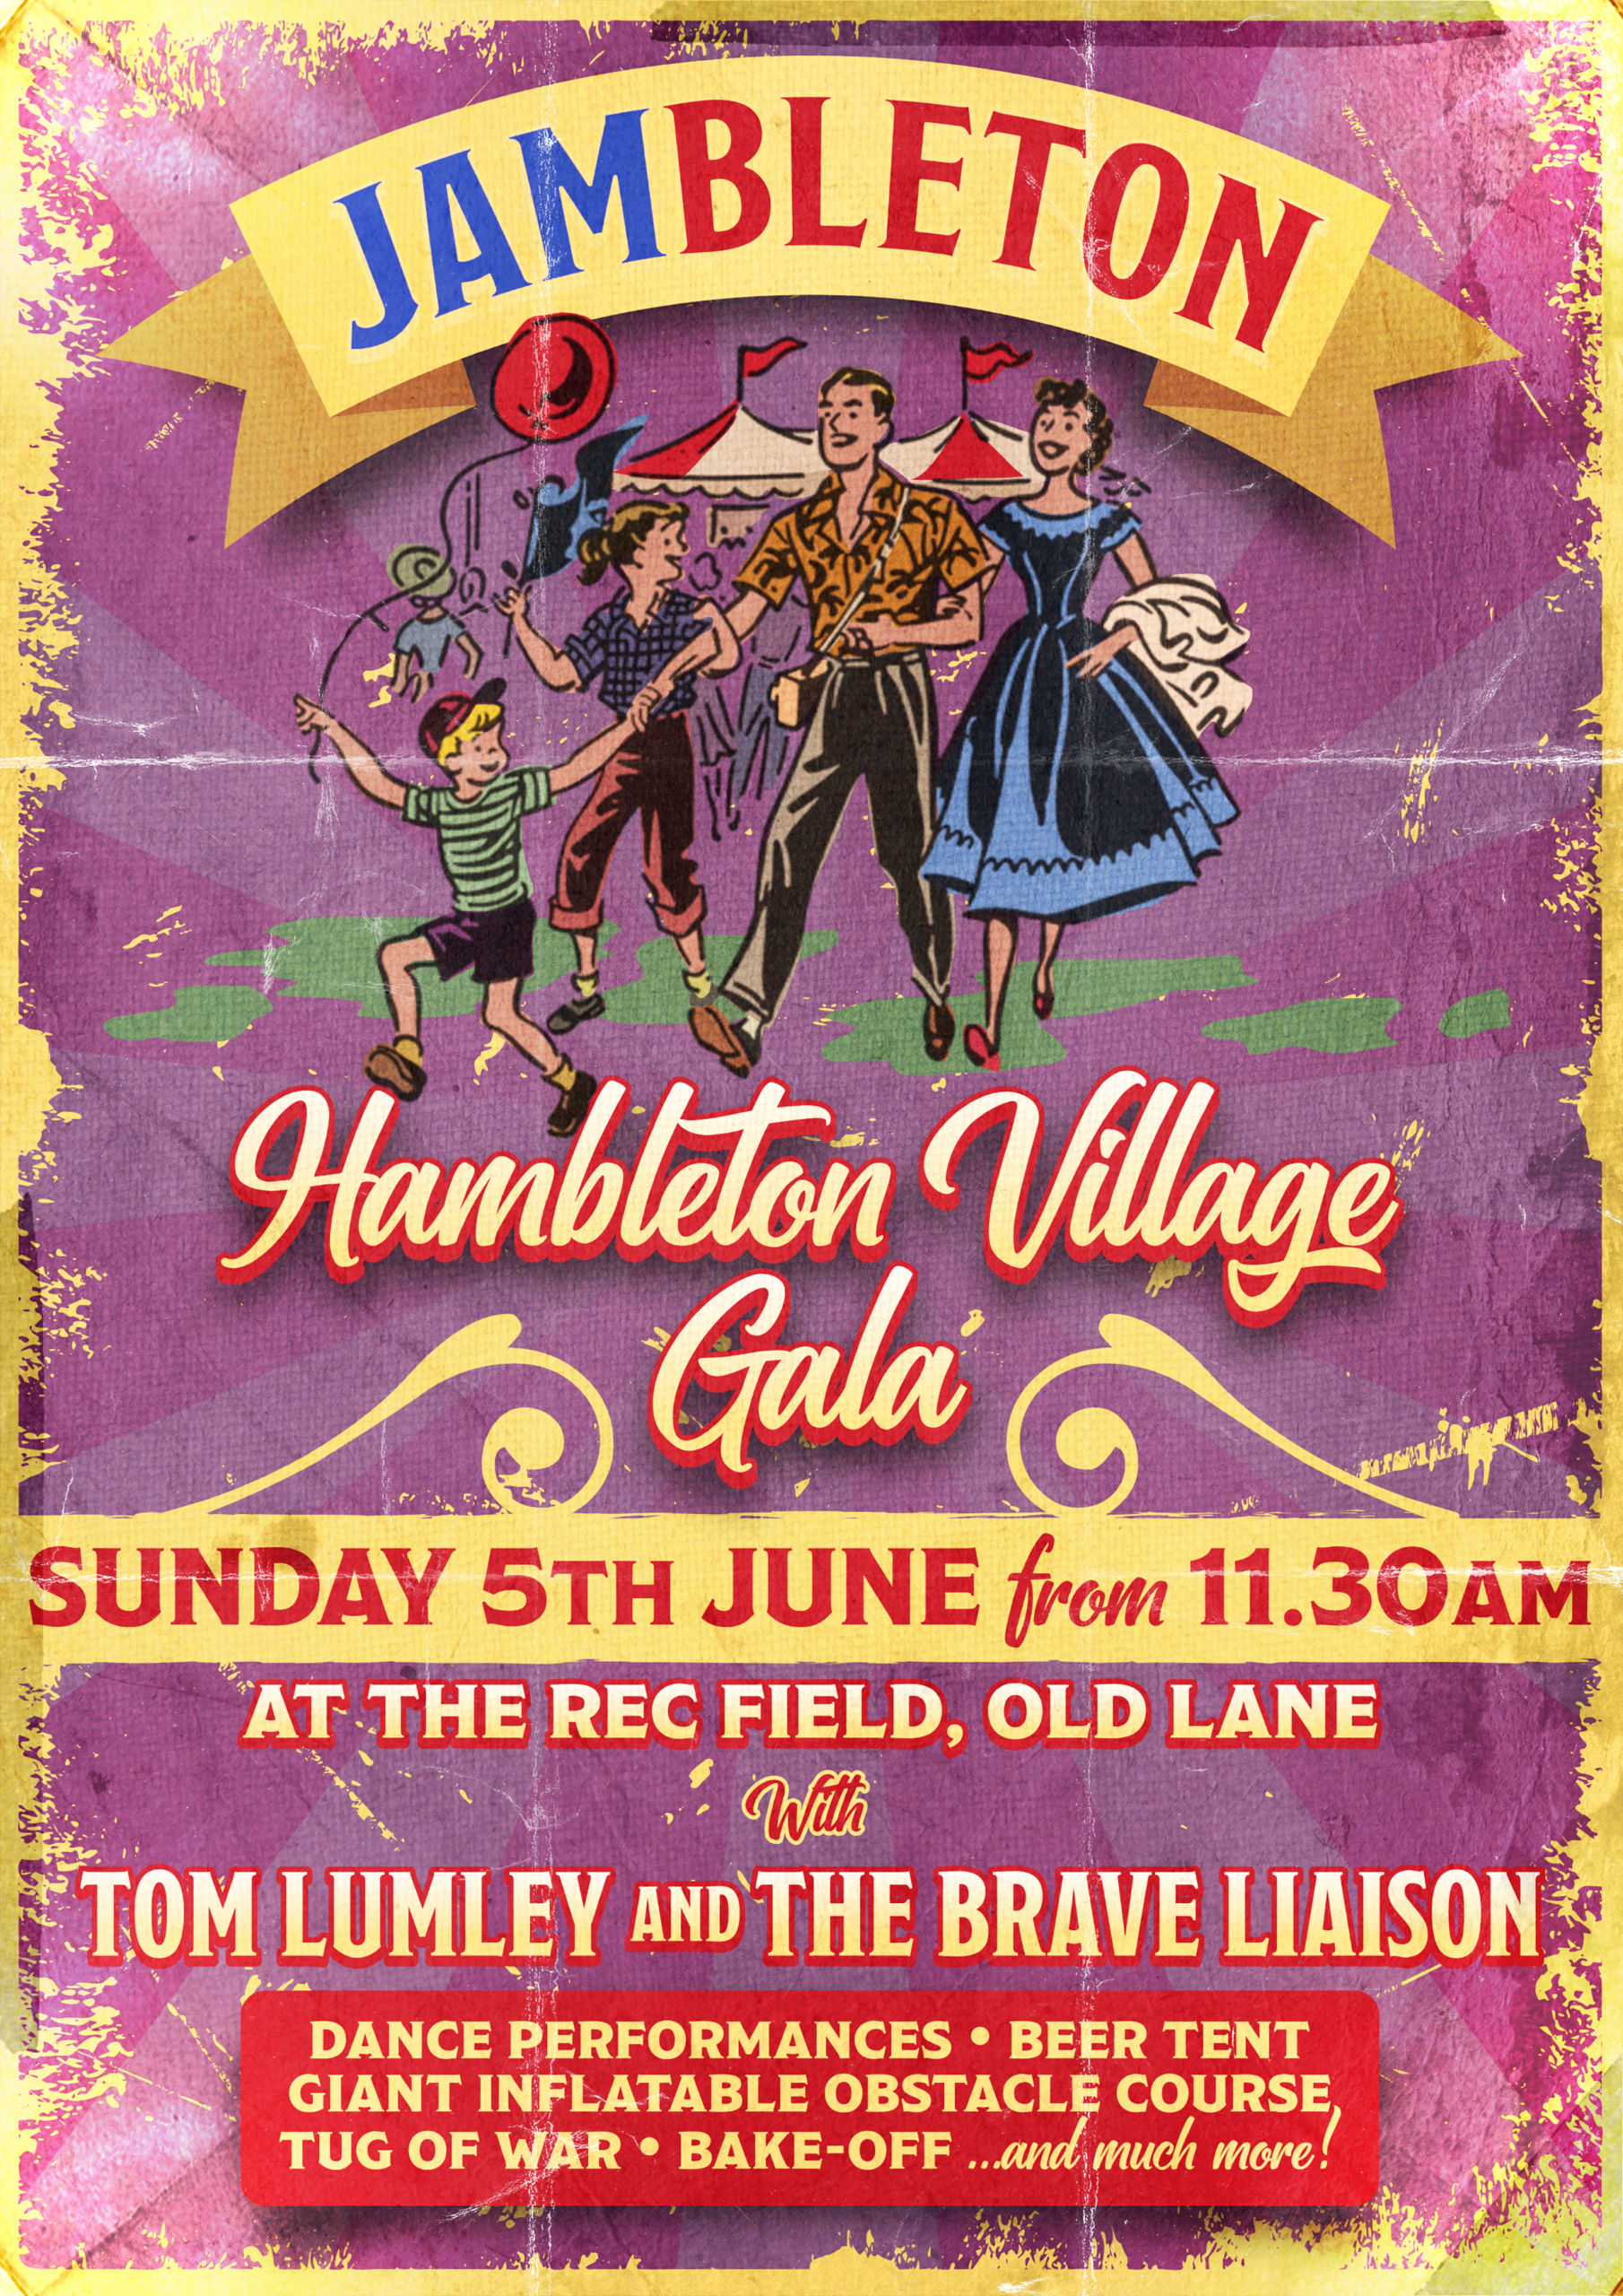 Vintage themed advert for the Jambleton event on 5th June 2022